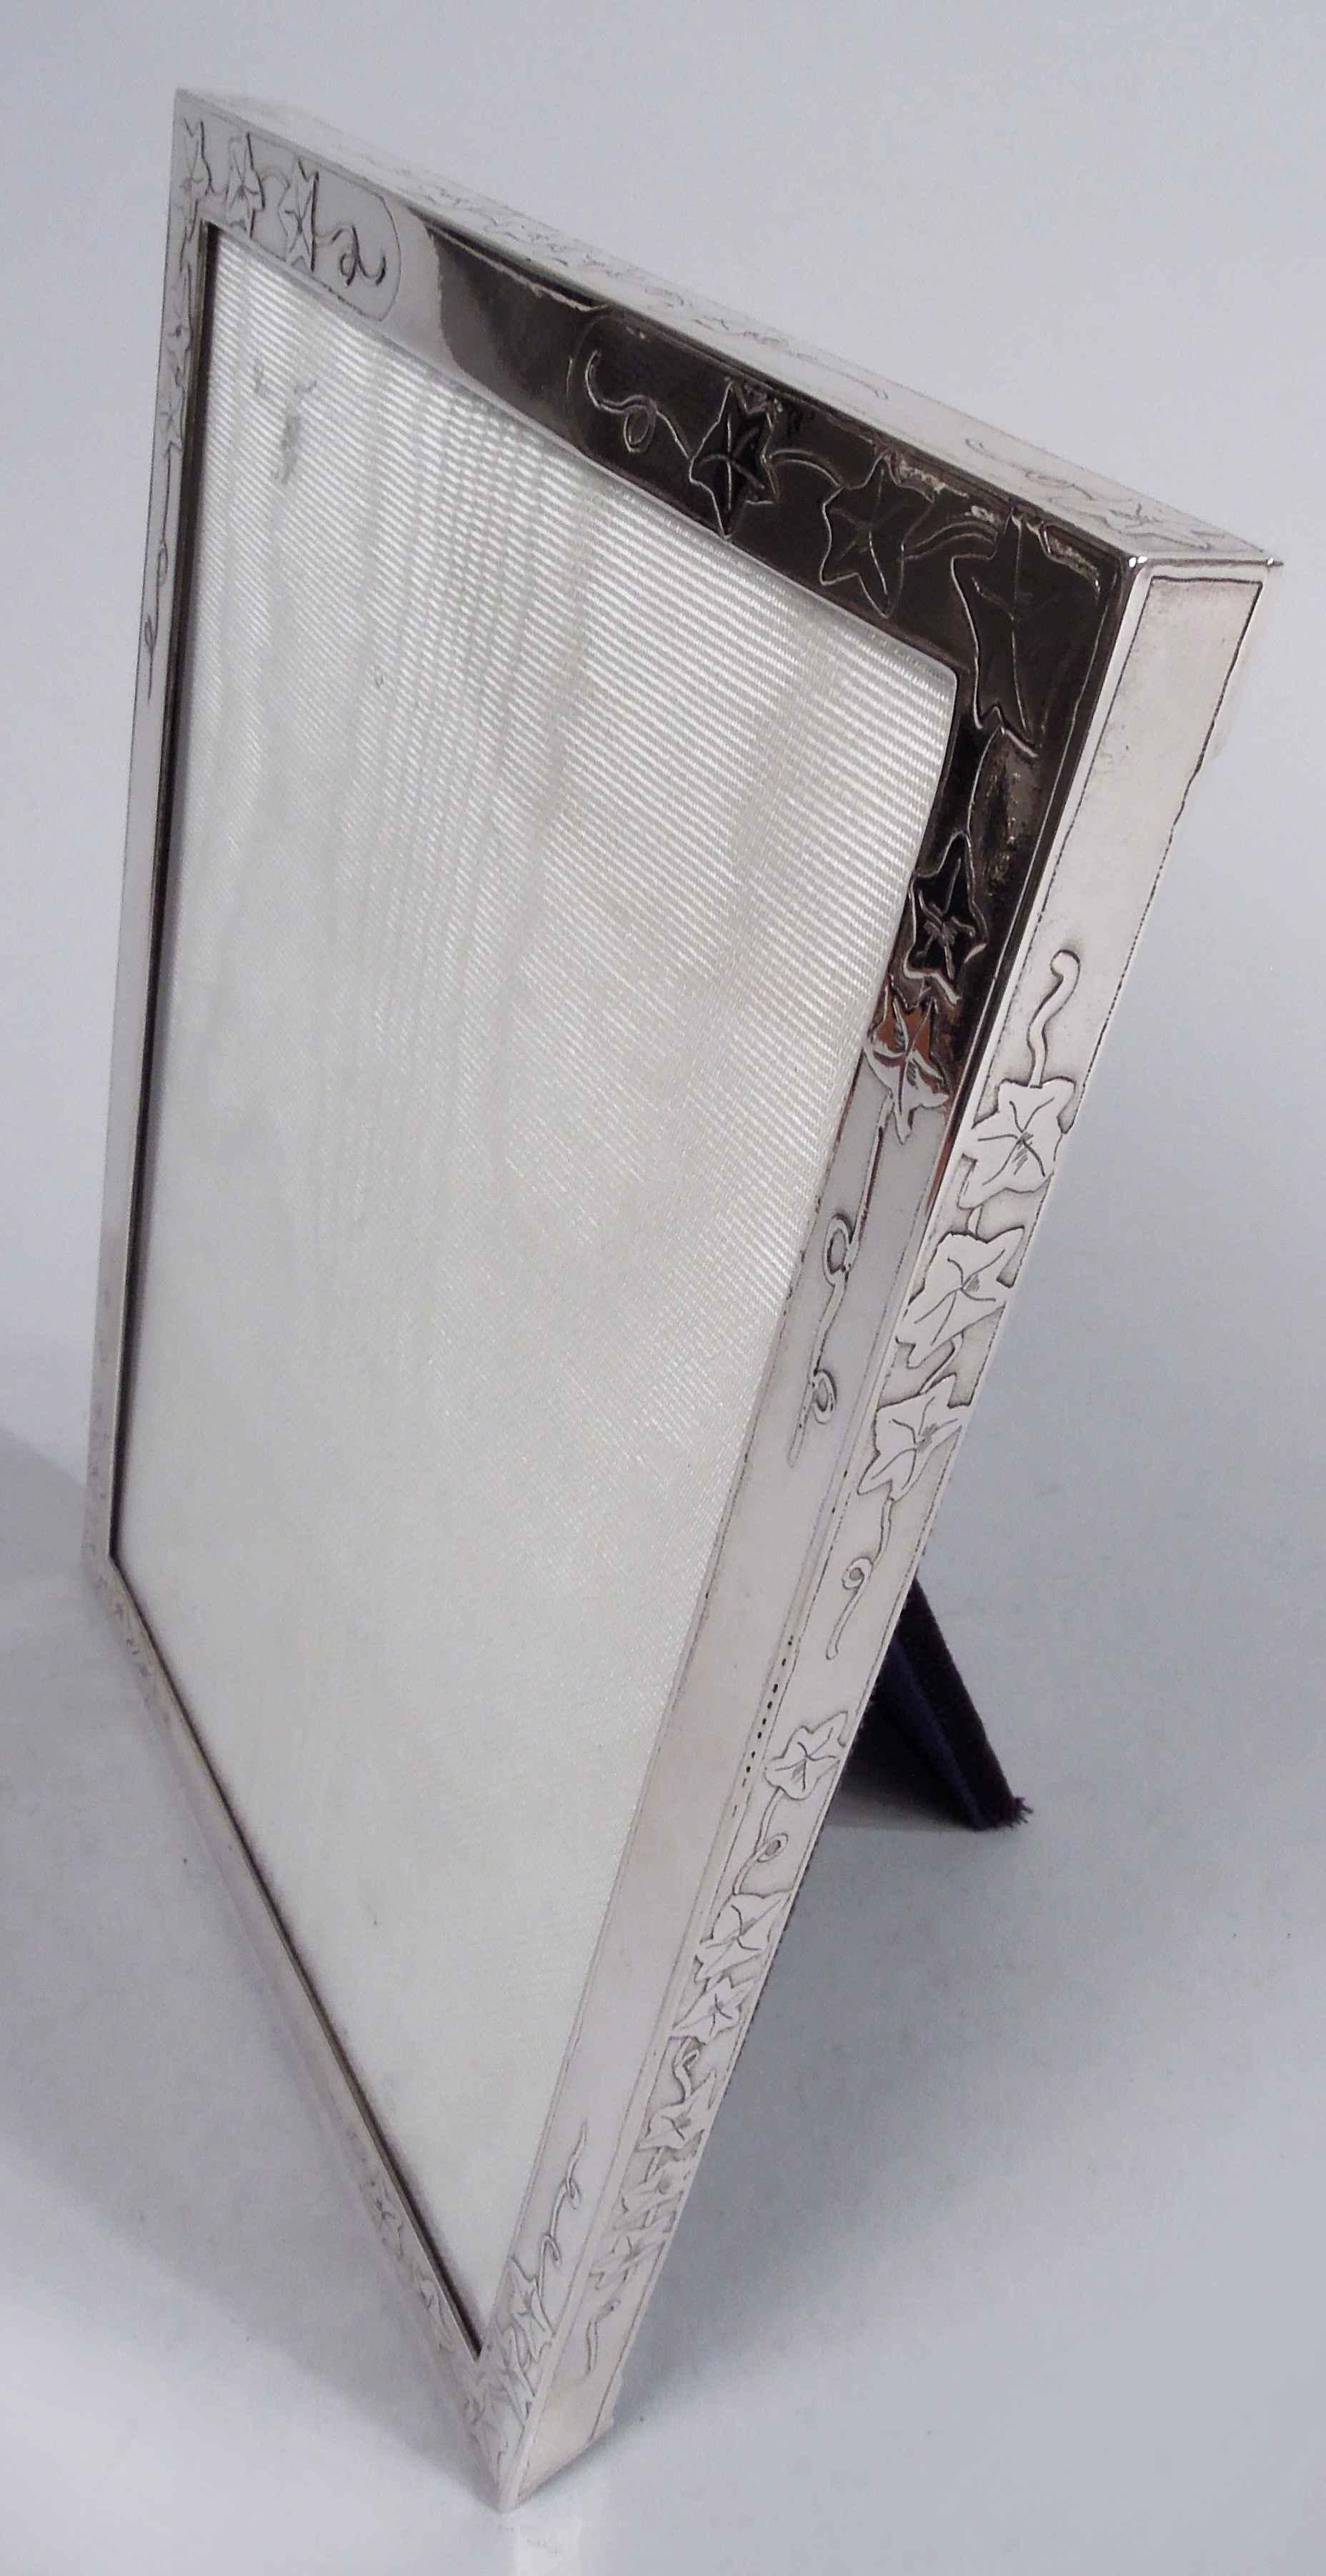 Edwardian sterling silver picture frame. Made by Tiffany & Co. in New York, ca 1910. Rectangular window in same flat surround. Acid-etched meandering ivy on front and sides. With glass, silk lining, and velvet back and hinged easel support for